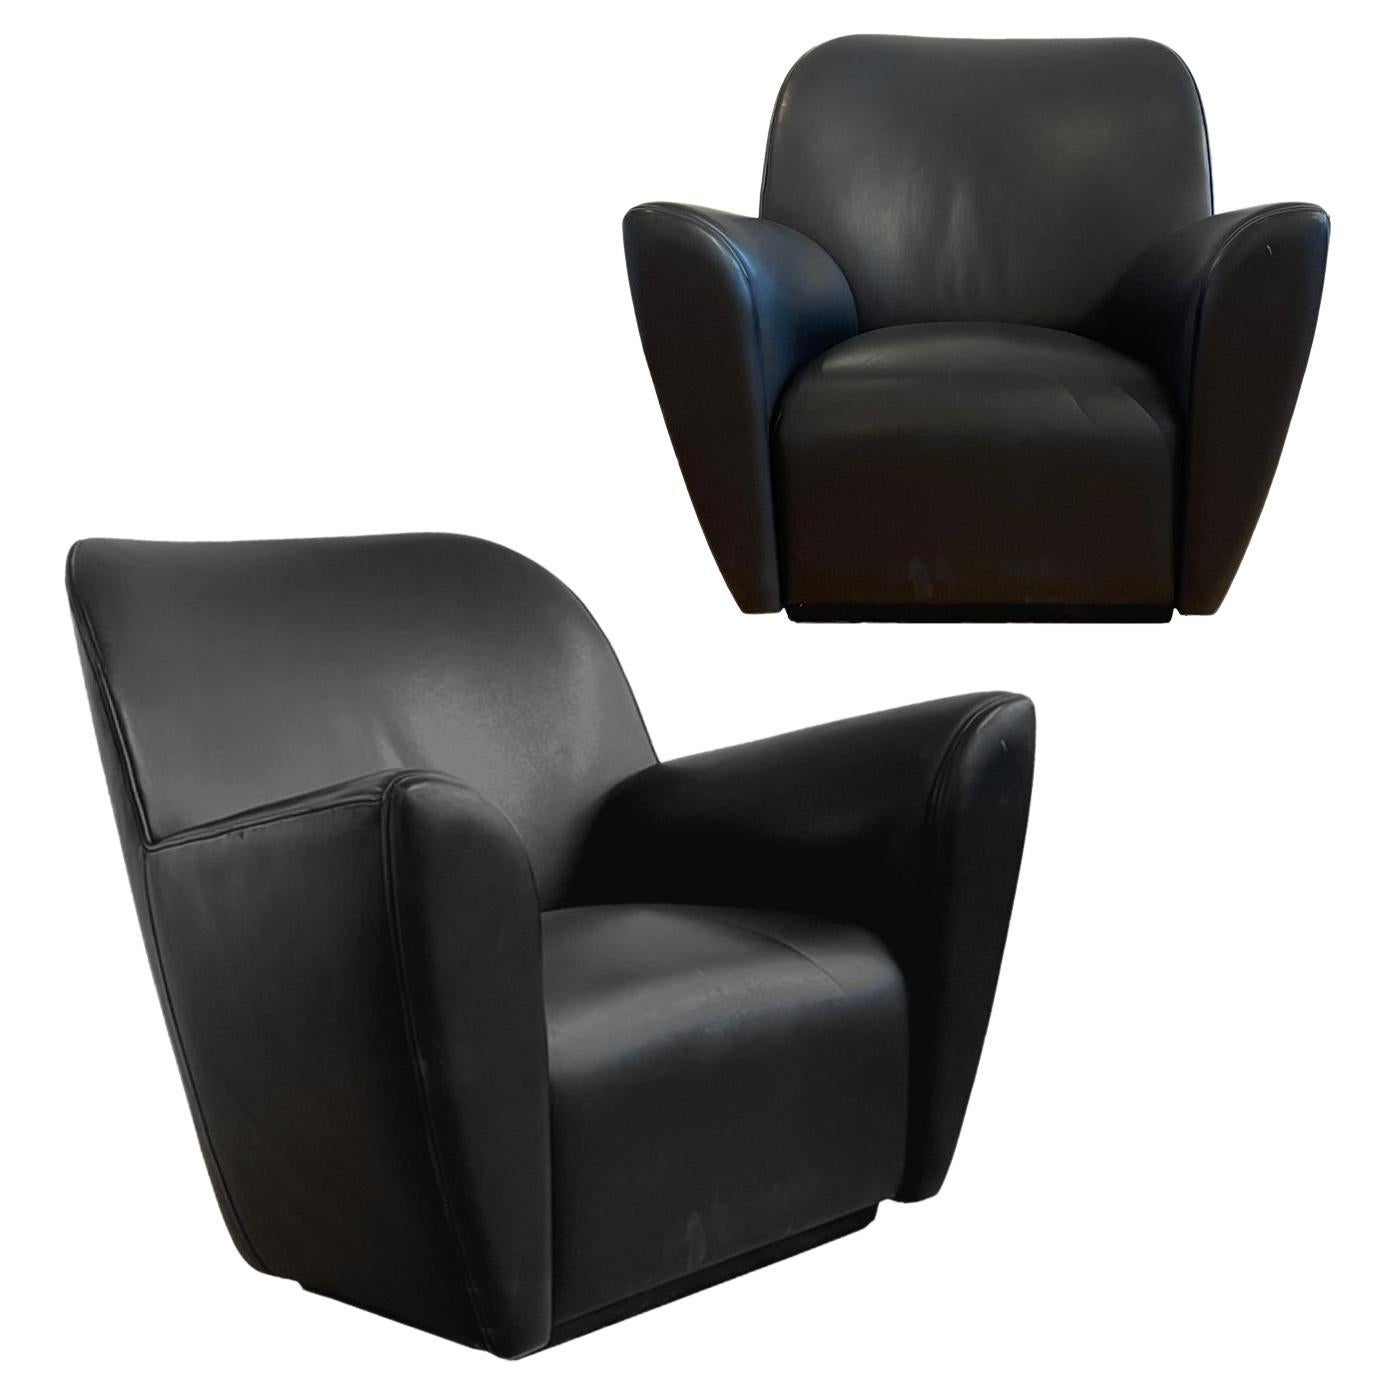 Pair of Martin Linder for Design America Post-Modern Black Leather Club Chairs